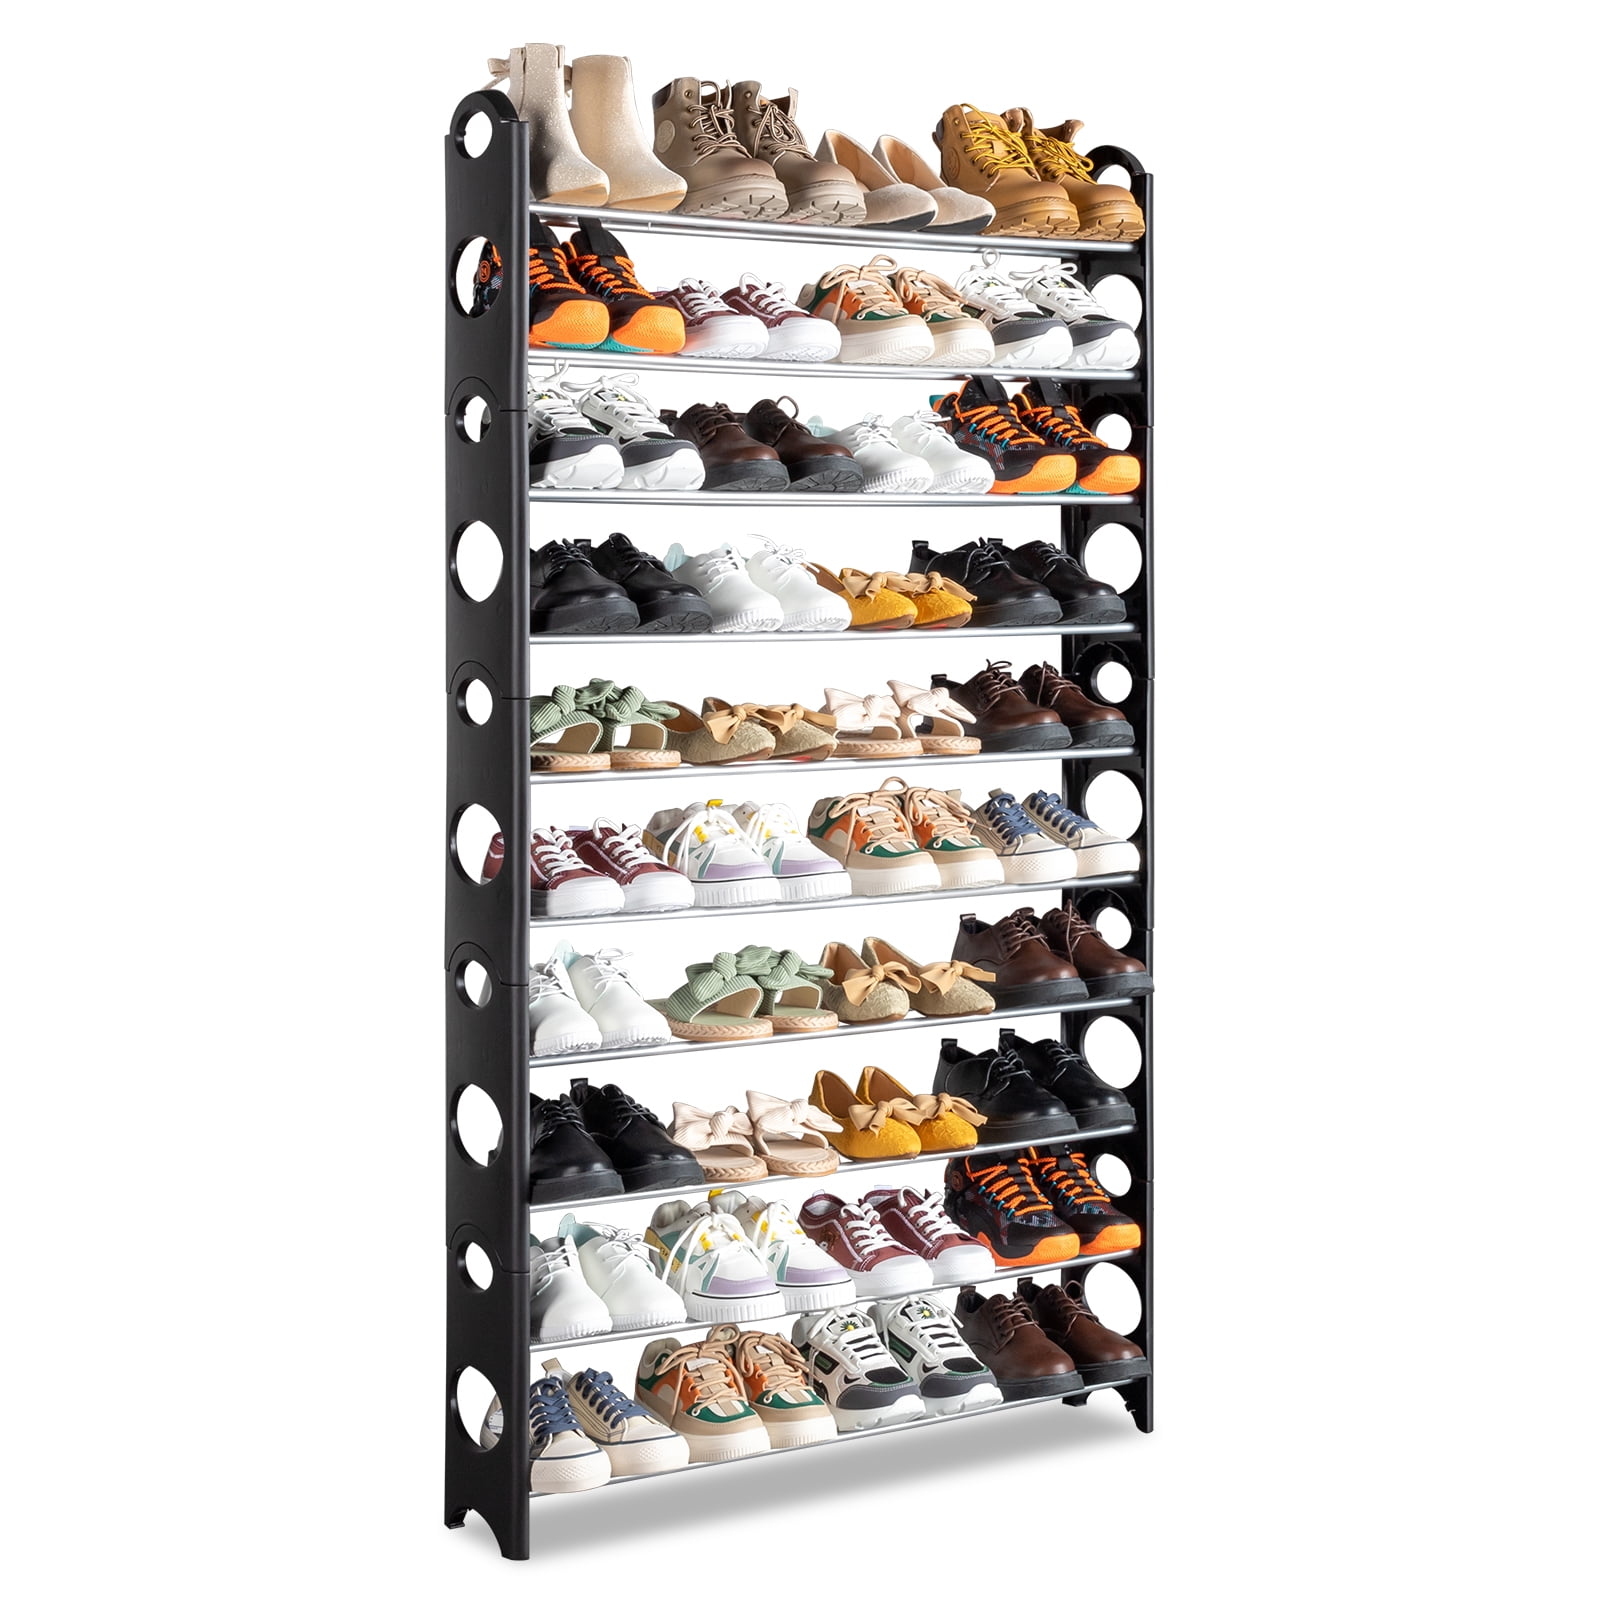 Dropship 50-Pair Shoe Rack Storage Organizer 10-Tier Portable Wardrobe  Tower Stackable Adjustable Shelf to Sell Online at a Lower Price